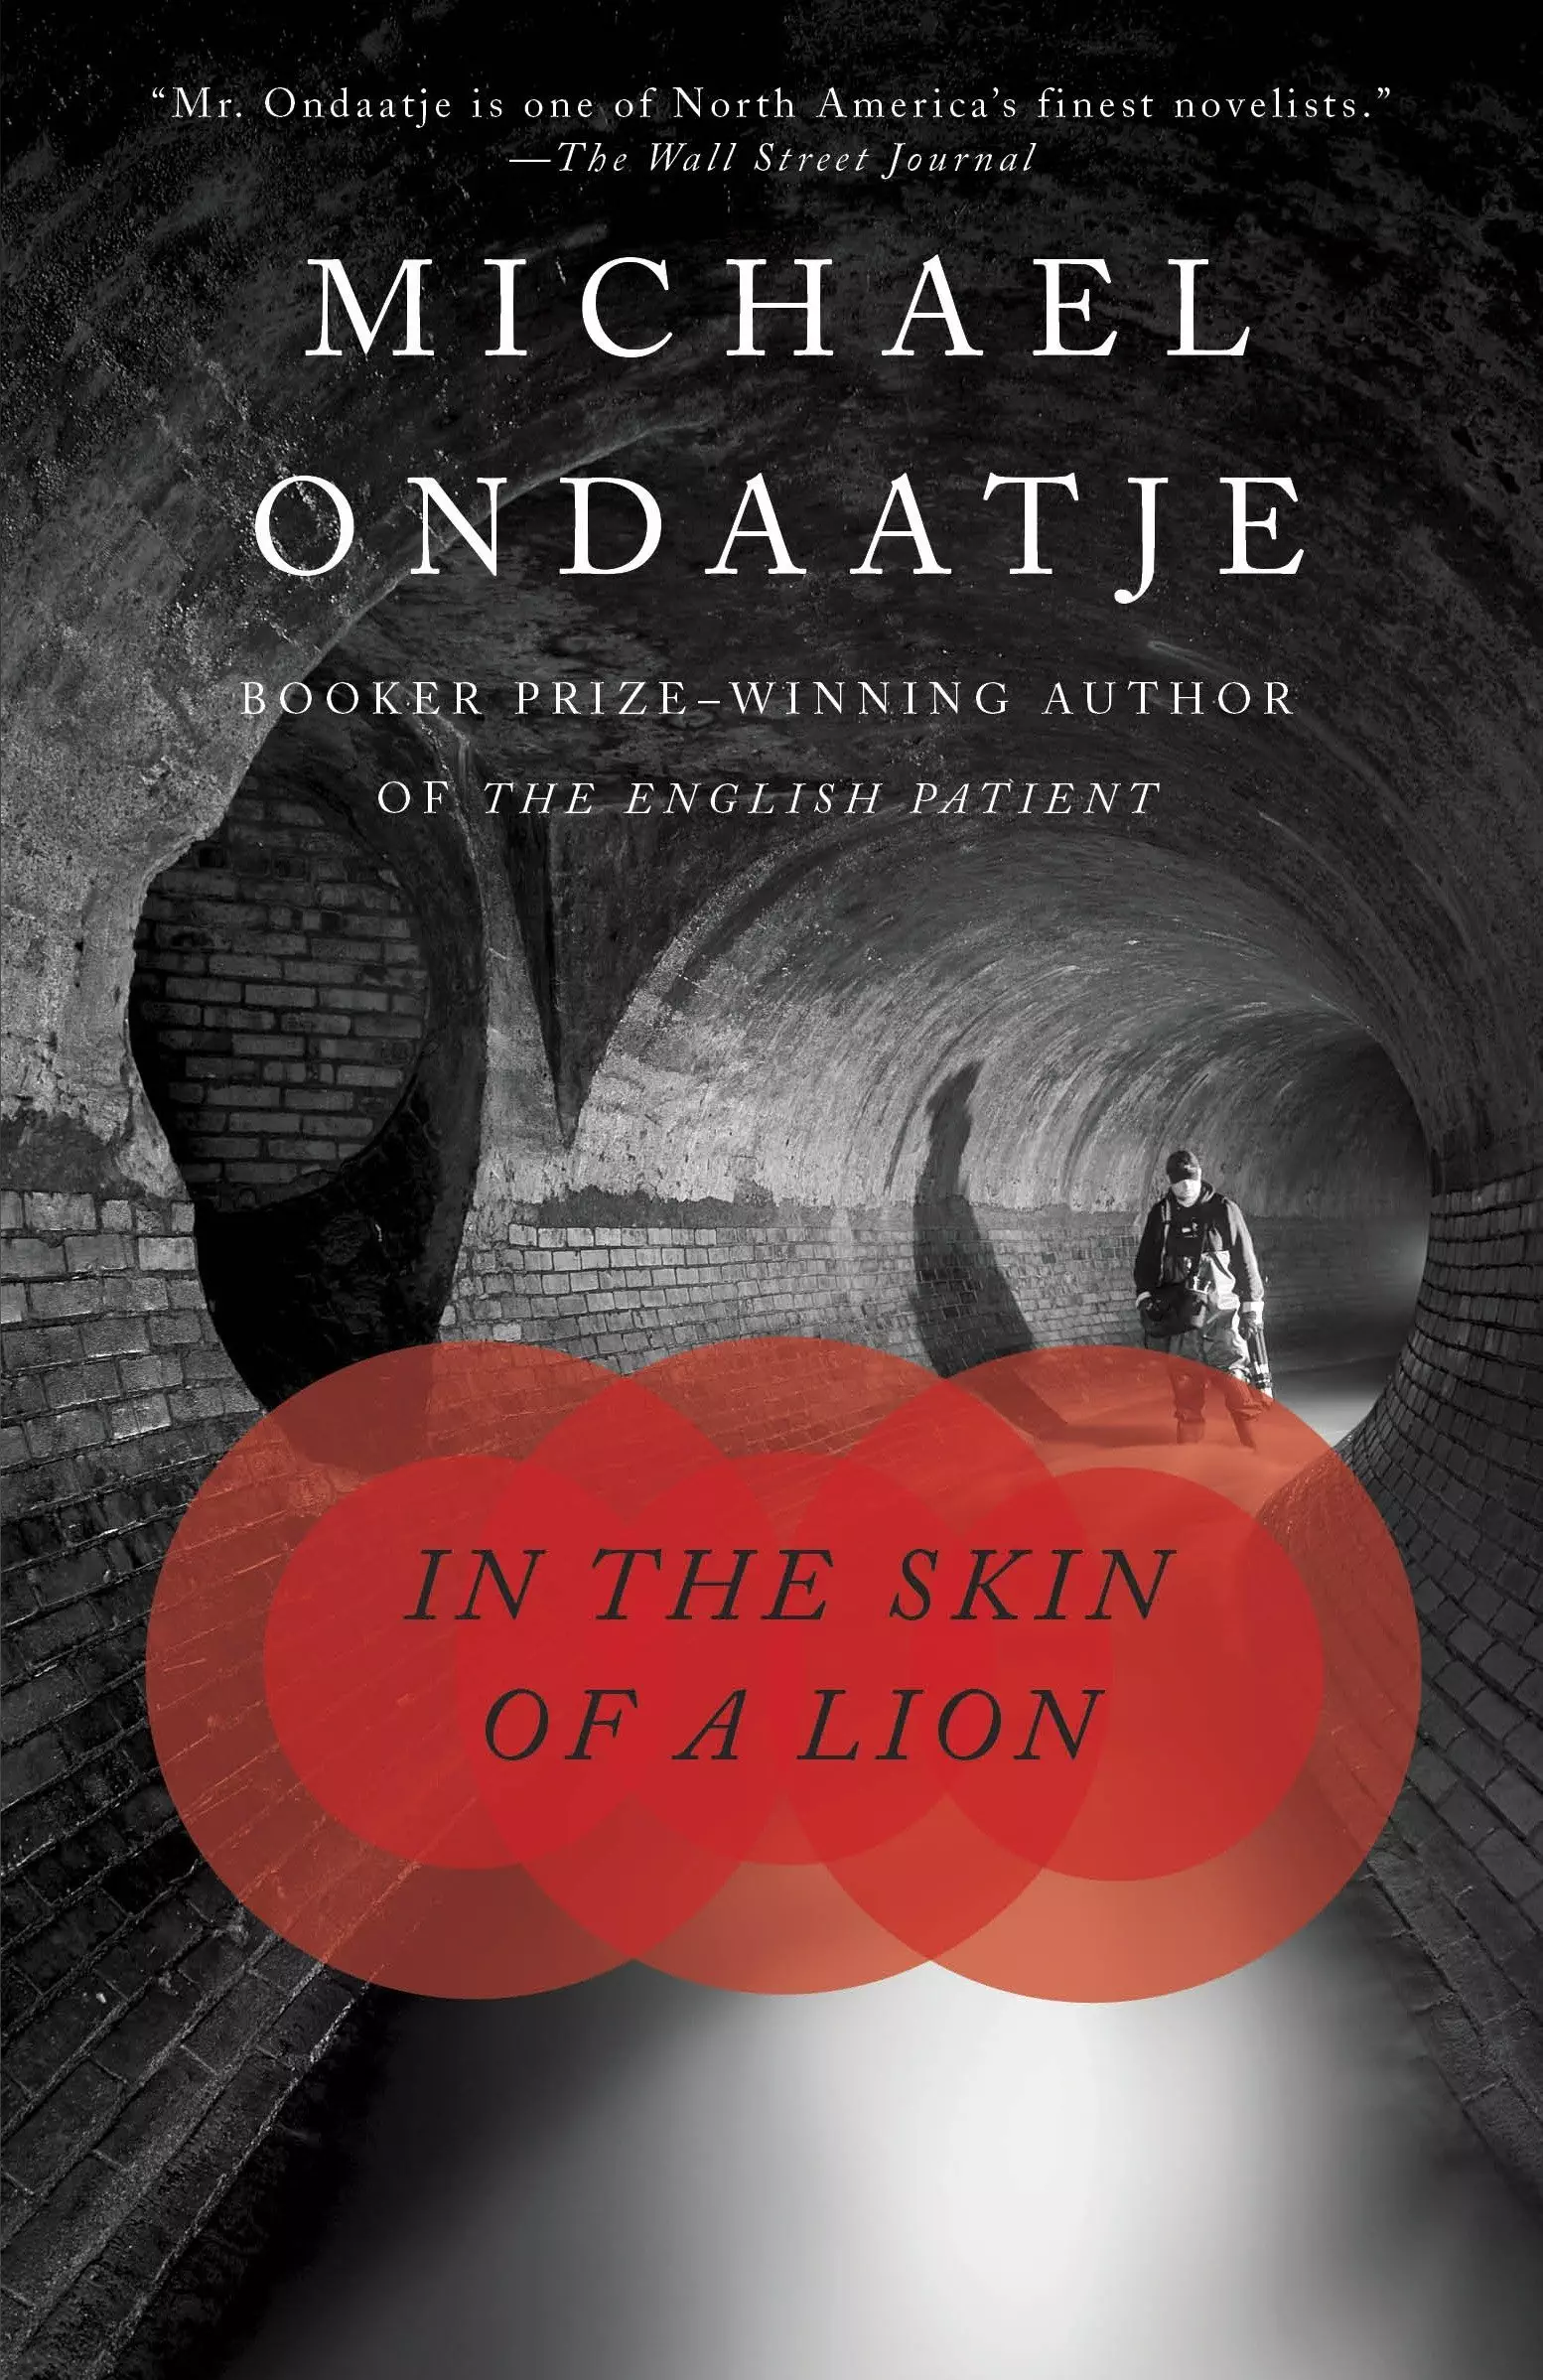 Buy In the Skin of a Lion (Vintage International) Book Online at Low Prices  in India | In the Skin of a Lion (Vintage International) Reviews & Ratings  - Amazon.in